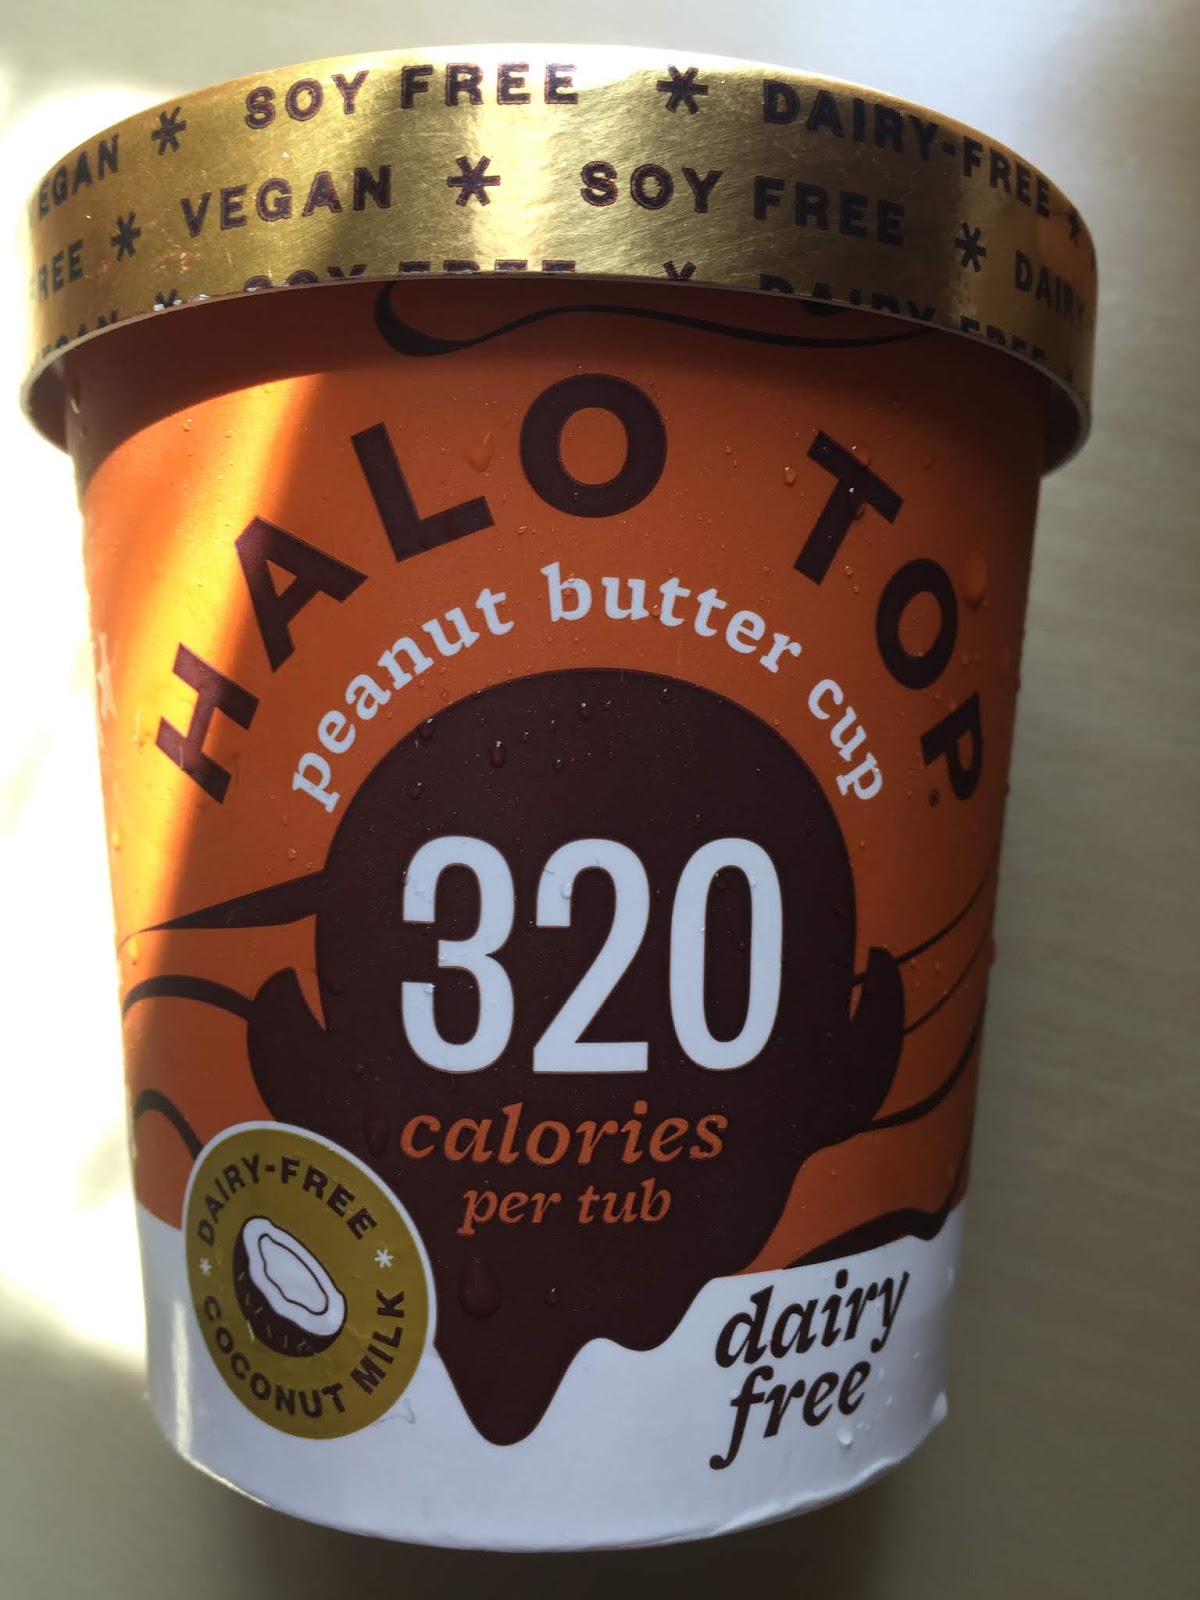 Is Halo Top Ice Cream Actually Healthy? - stack